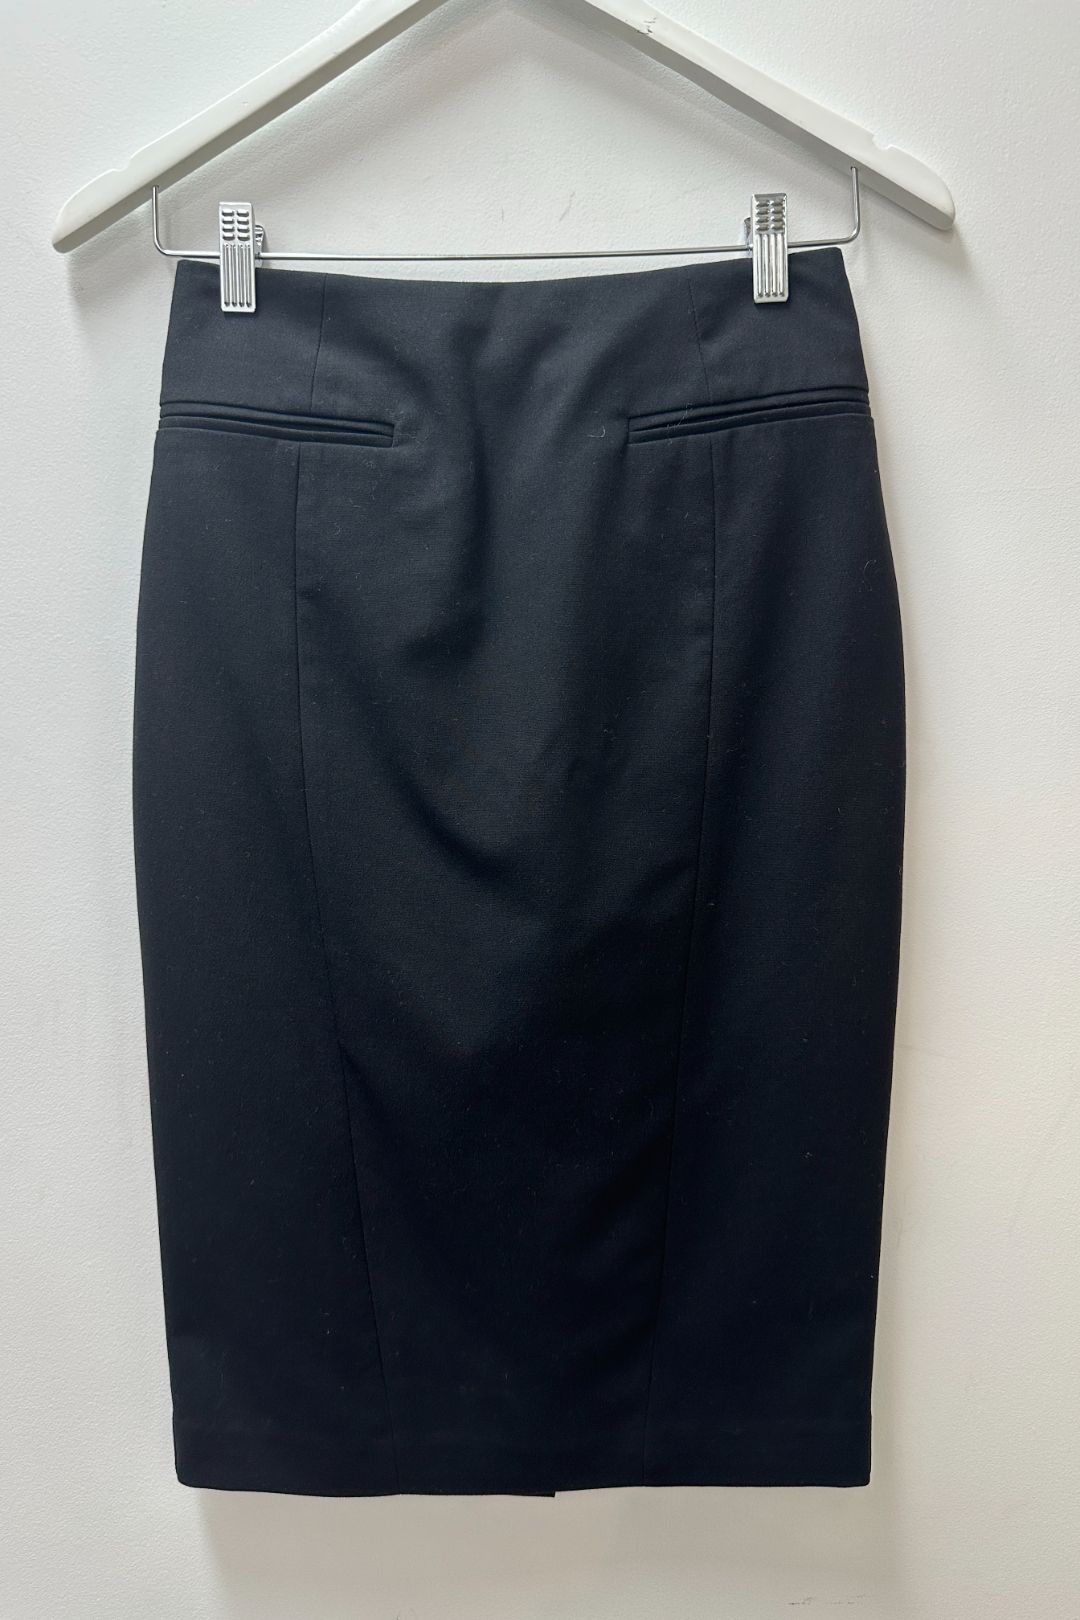 Cue Tailored Pencil Skirt in Black